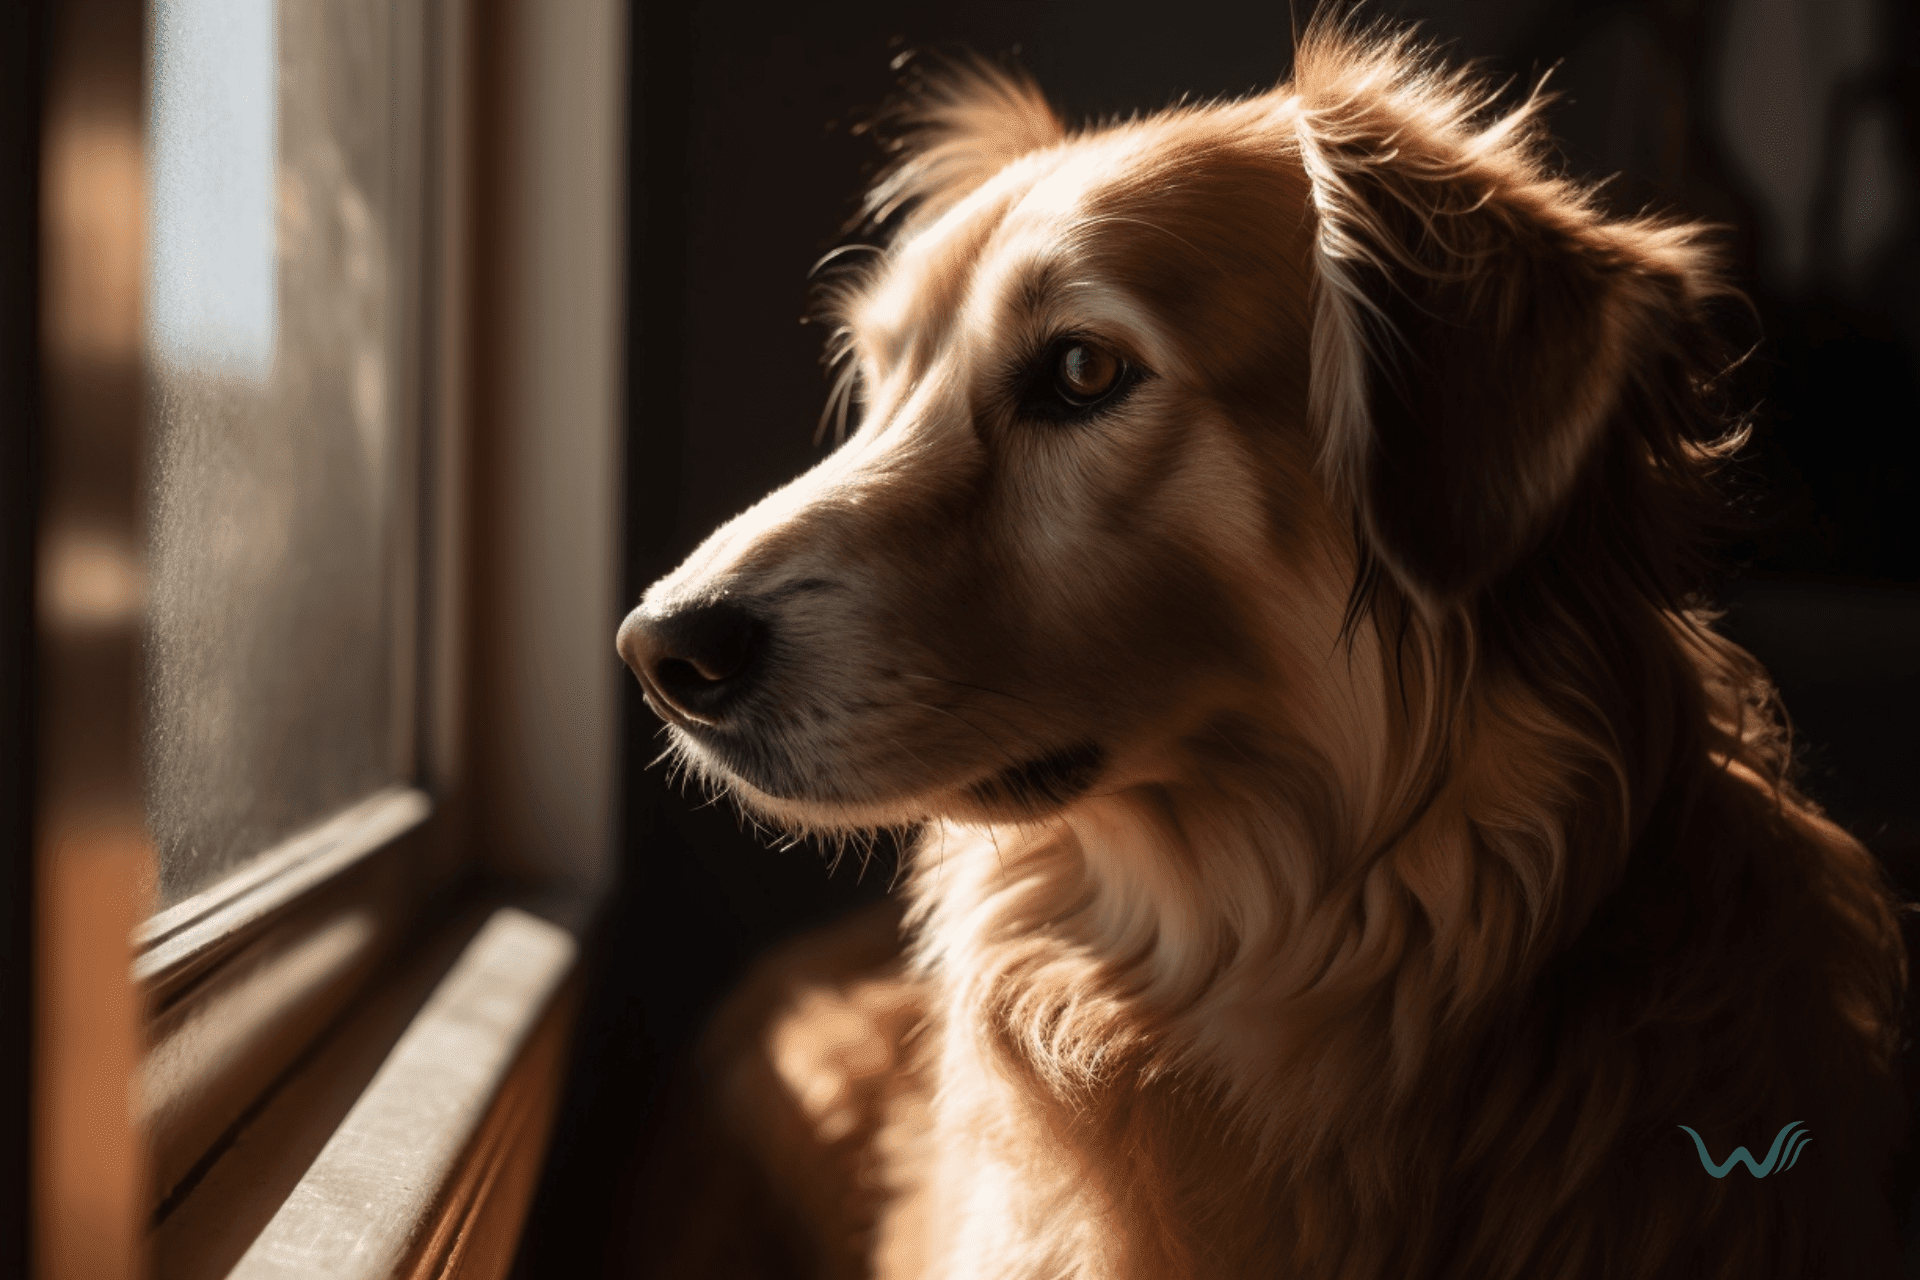 housing discrimination protection for emotional support animals